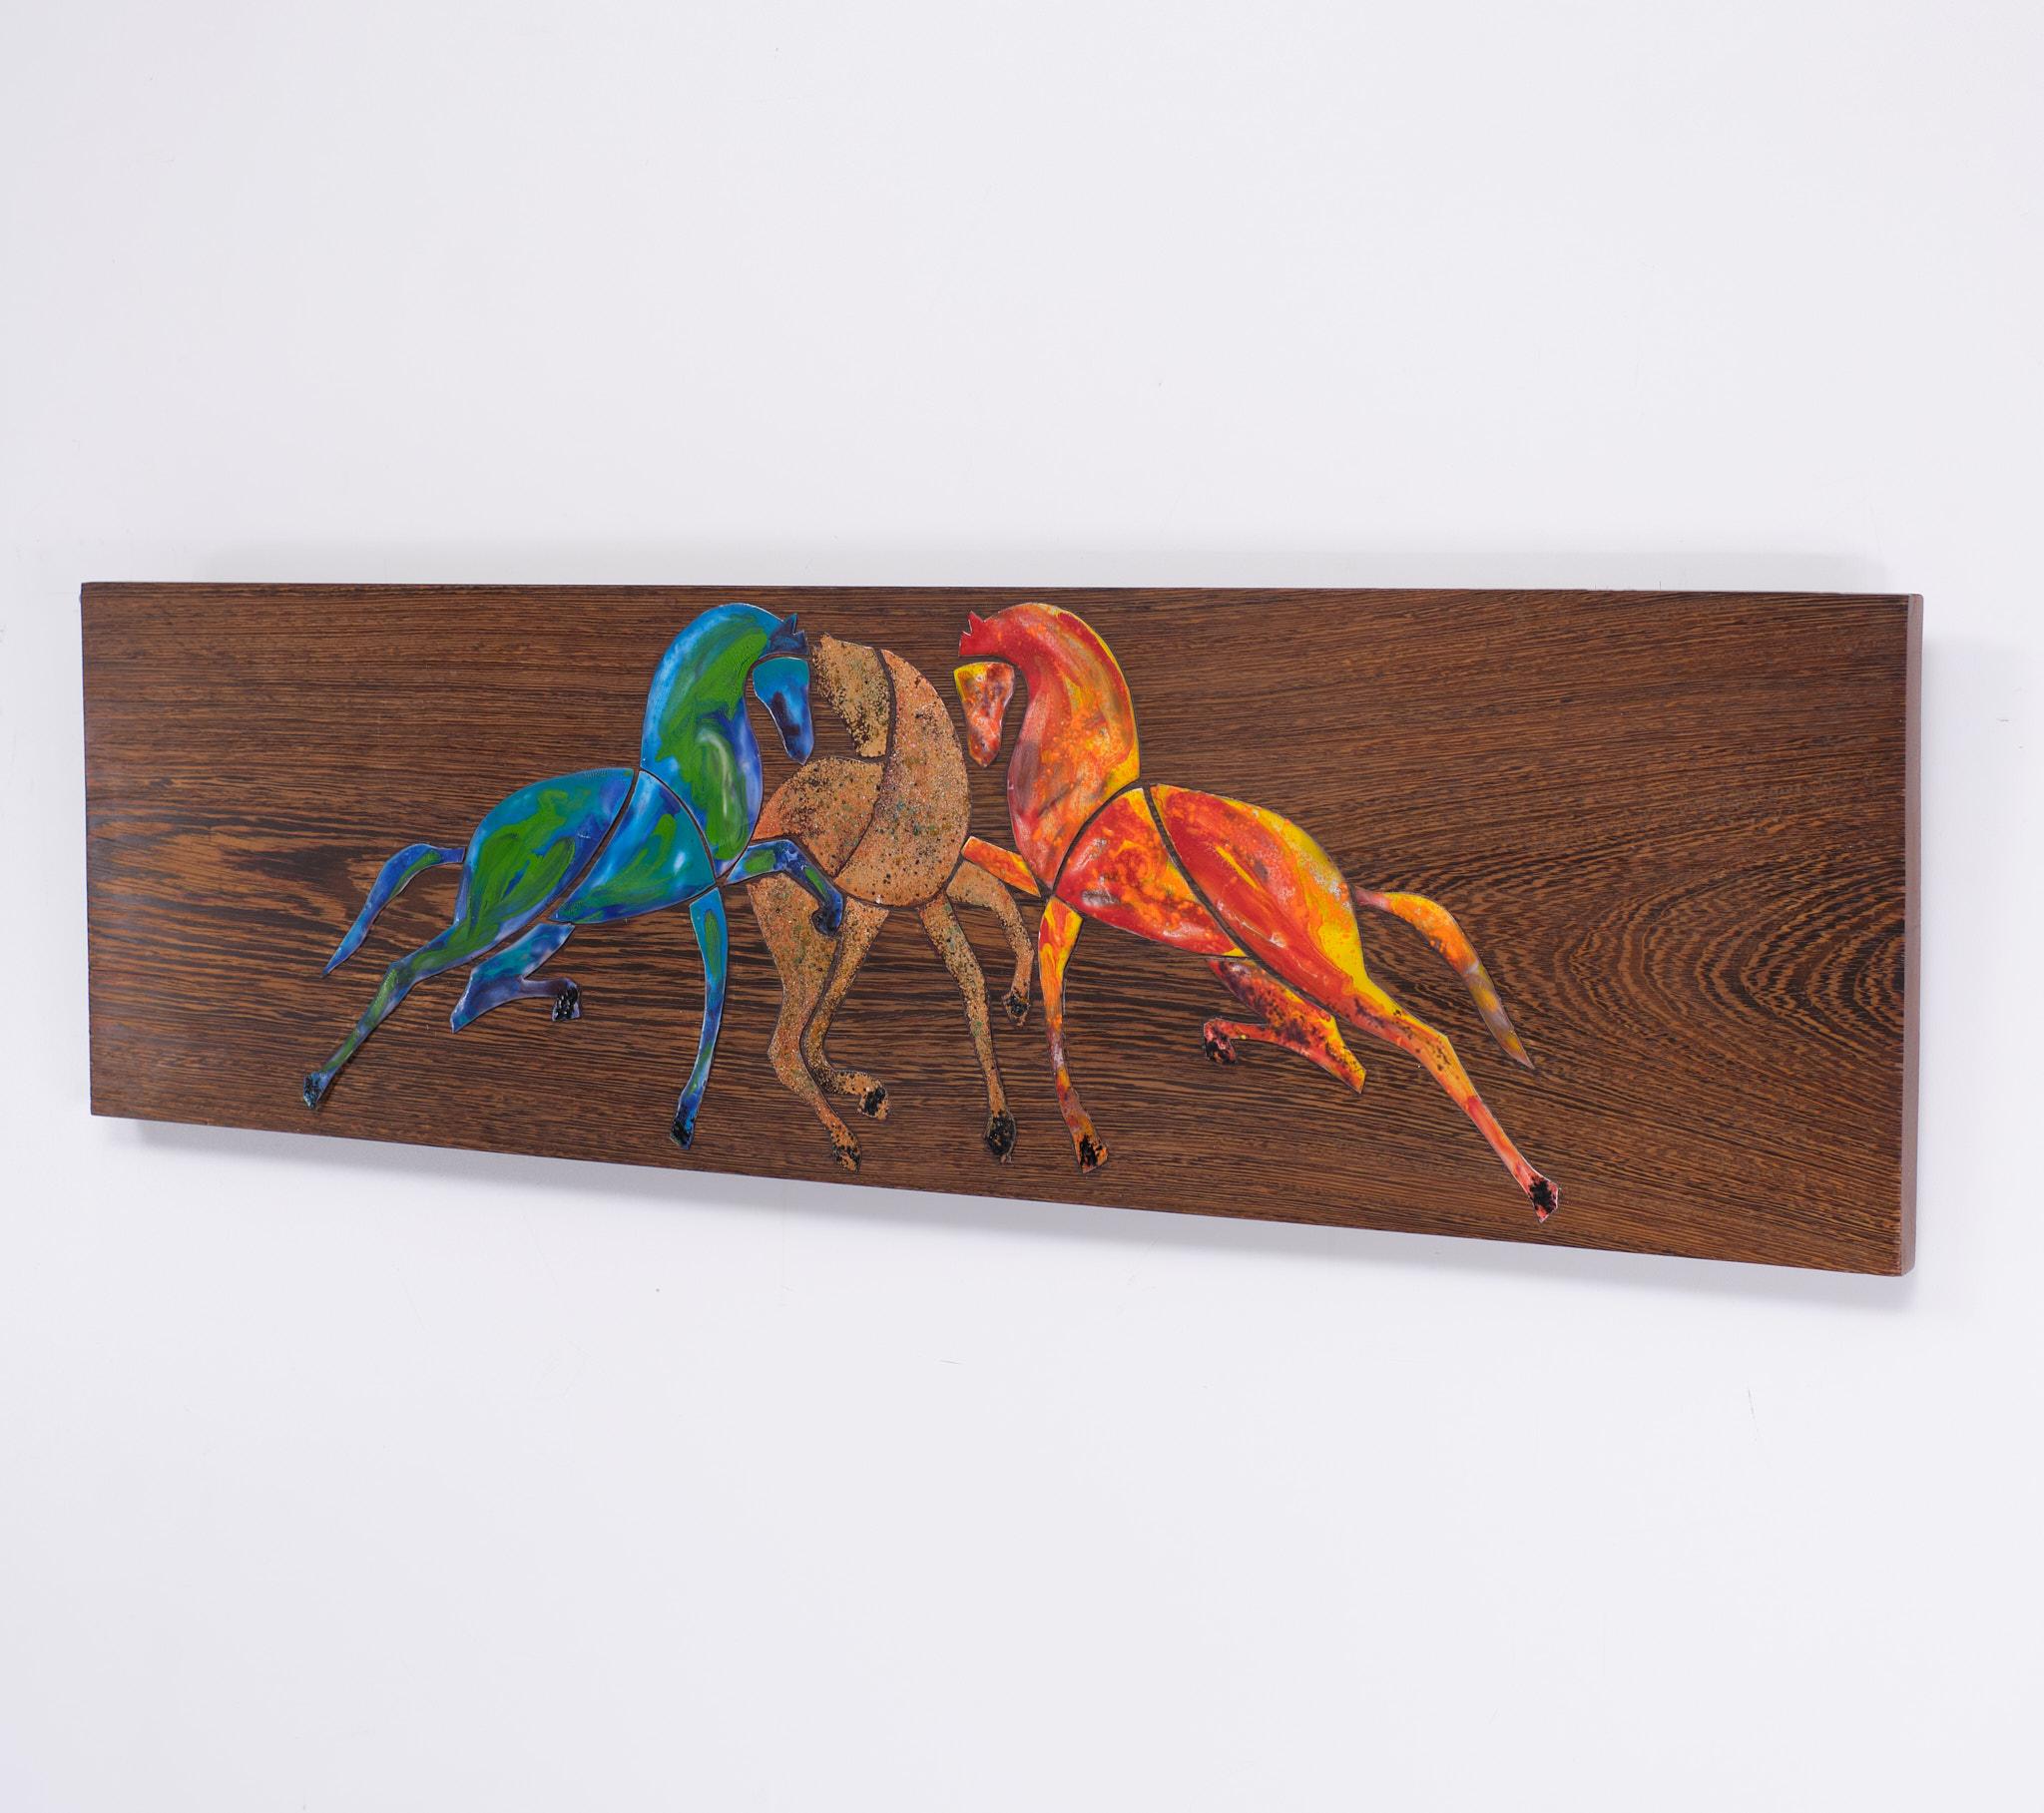 Enamel Horses in many colors , on a Thick Wénge panel . Love the movement 
in the Horses . Attributed to Julia F.M.T. Braendle (1929-1982). 
Background information.
Juliana Francisca Maria Tosco Braendle (Brändle) was born on 28 August 1929 in